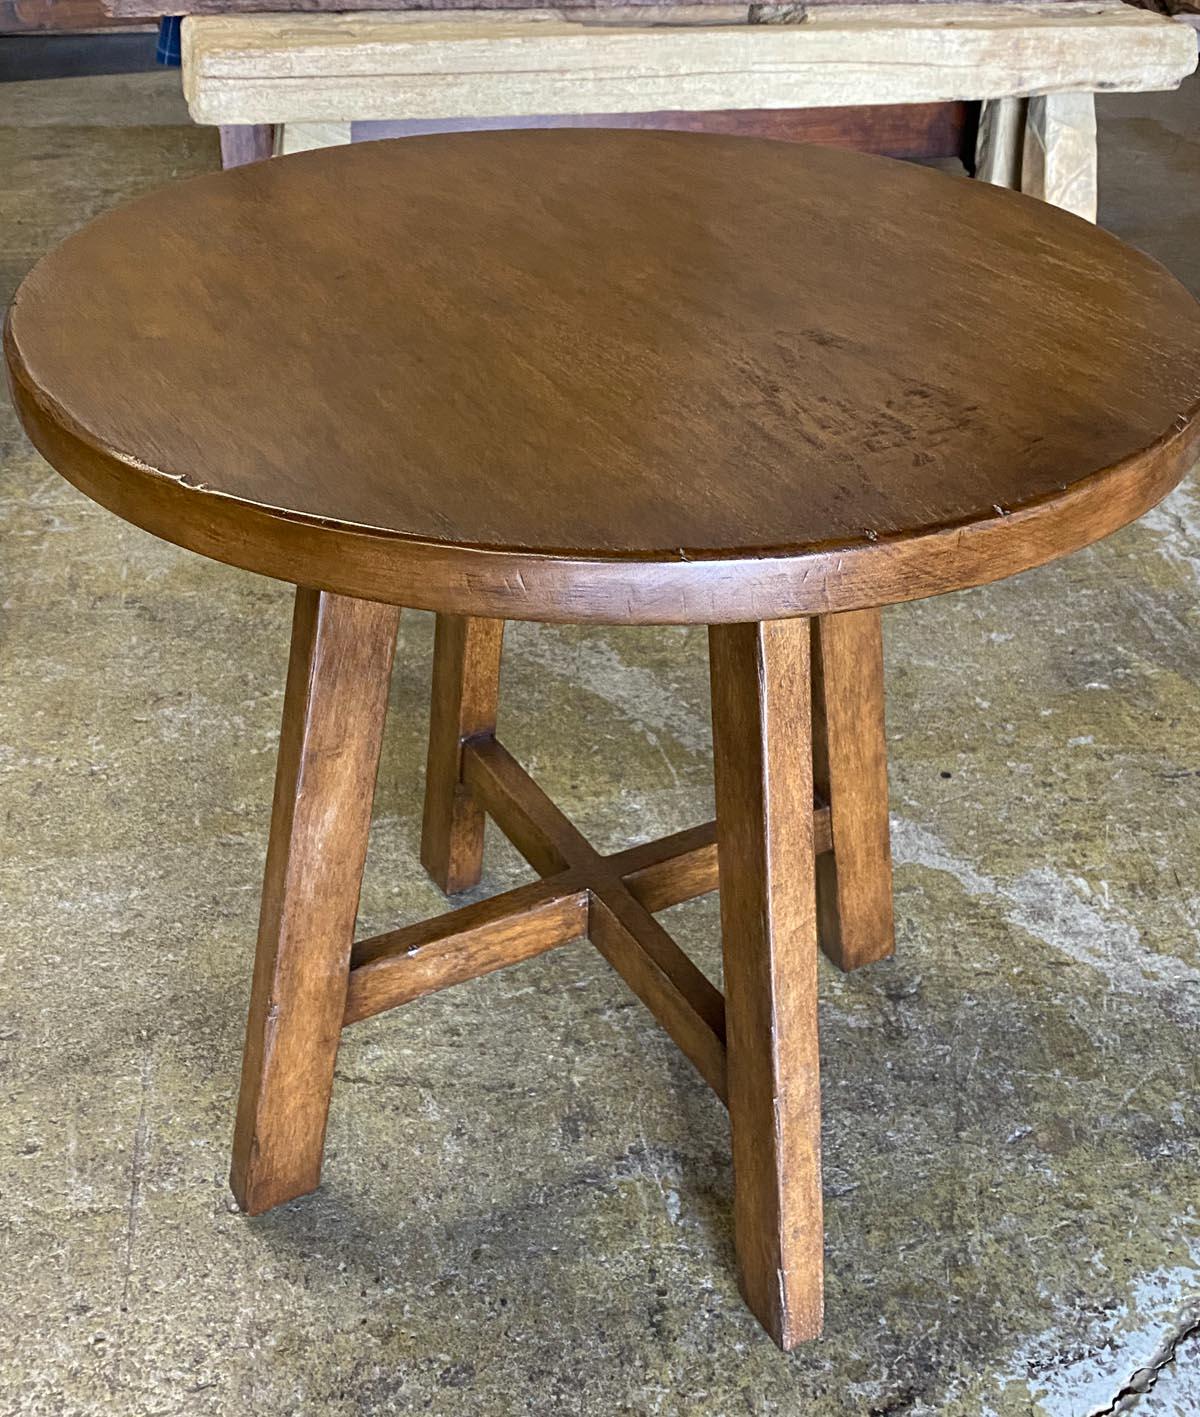 Dos Gallos custom Selma side table. Show here in Walnut with a French Walnut finish and medium distress. Can be made in any size and finish. Lead time is 14 weeks. 
DUE TO FLUCTUATING MATERIAL AND LABOR COSTS, PRICES MAY CHANGE. PLEASE INQUIRY